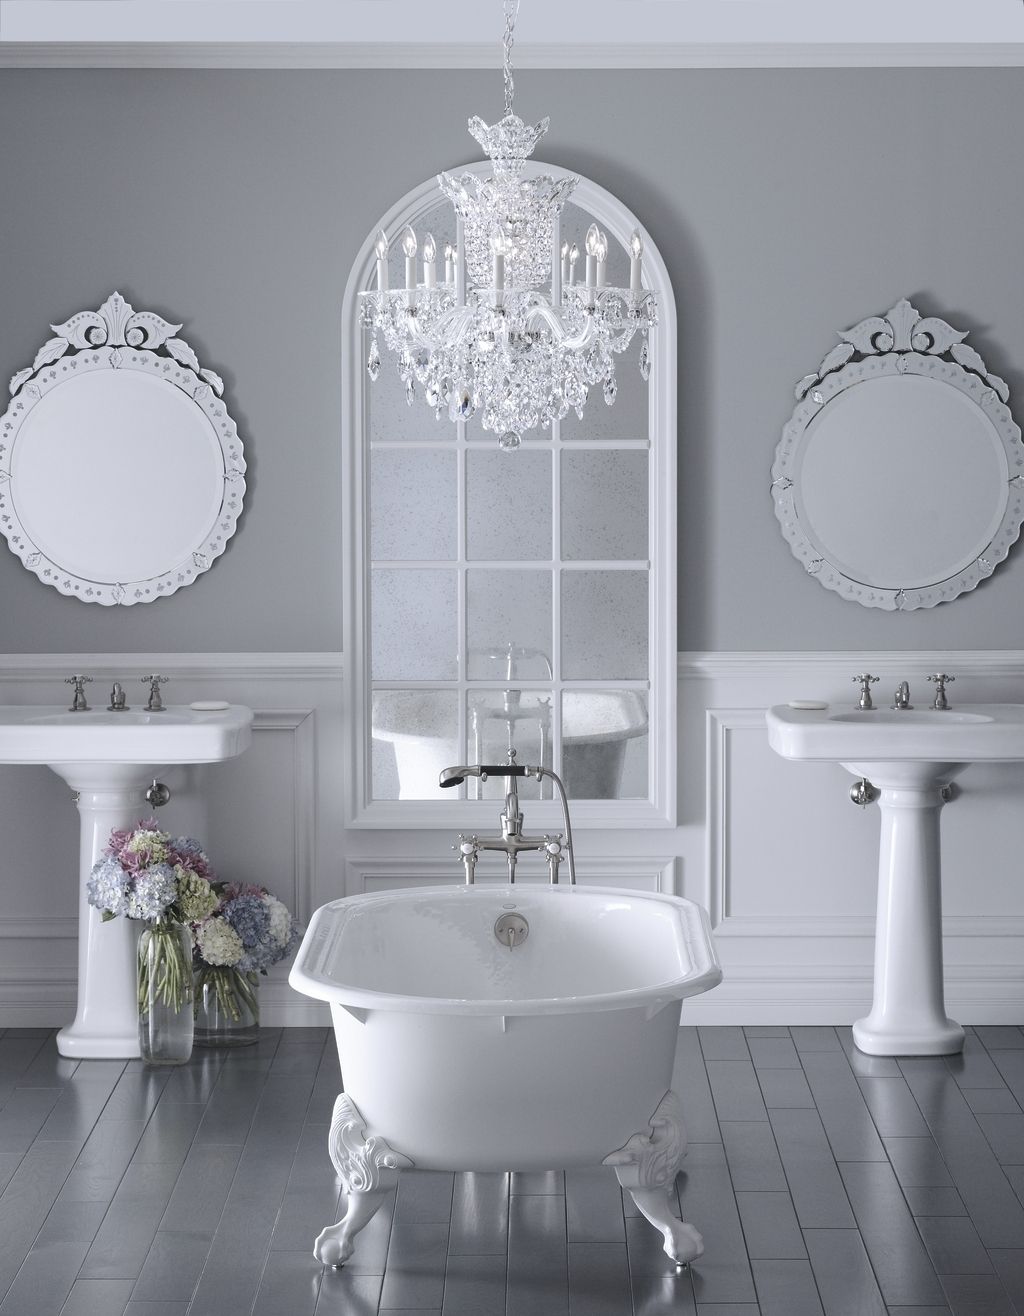 Crystal Chandelier For Bathroom Creative Bathroom Decoration Regarding Crystal Bathroom Chandelier (View 6 of 12)